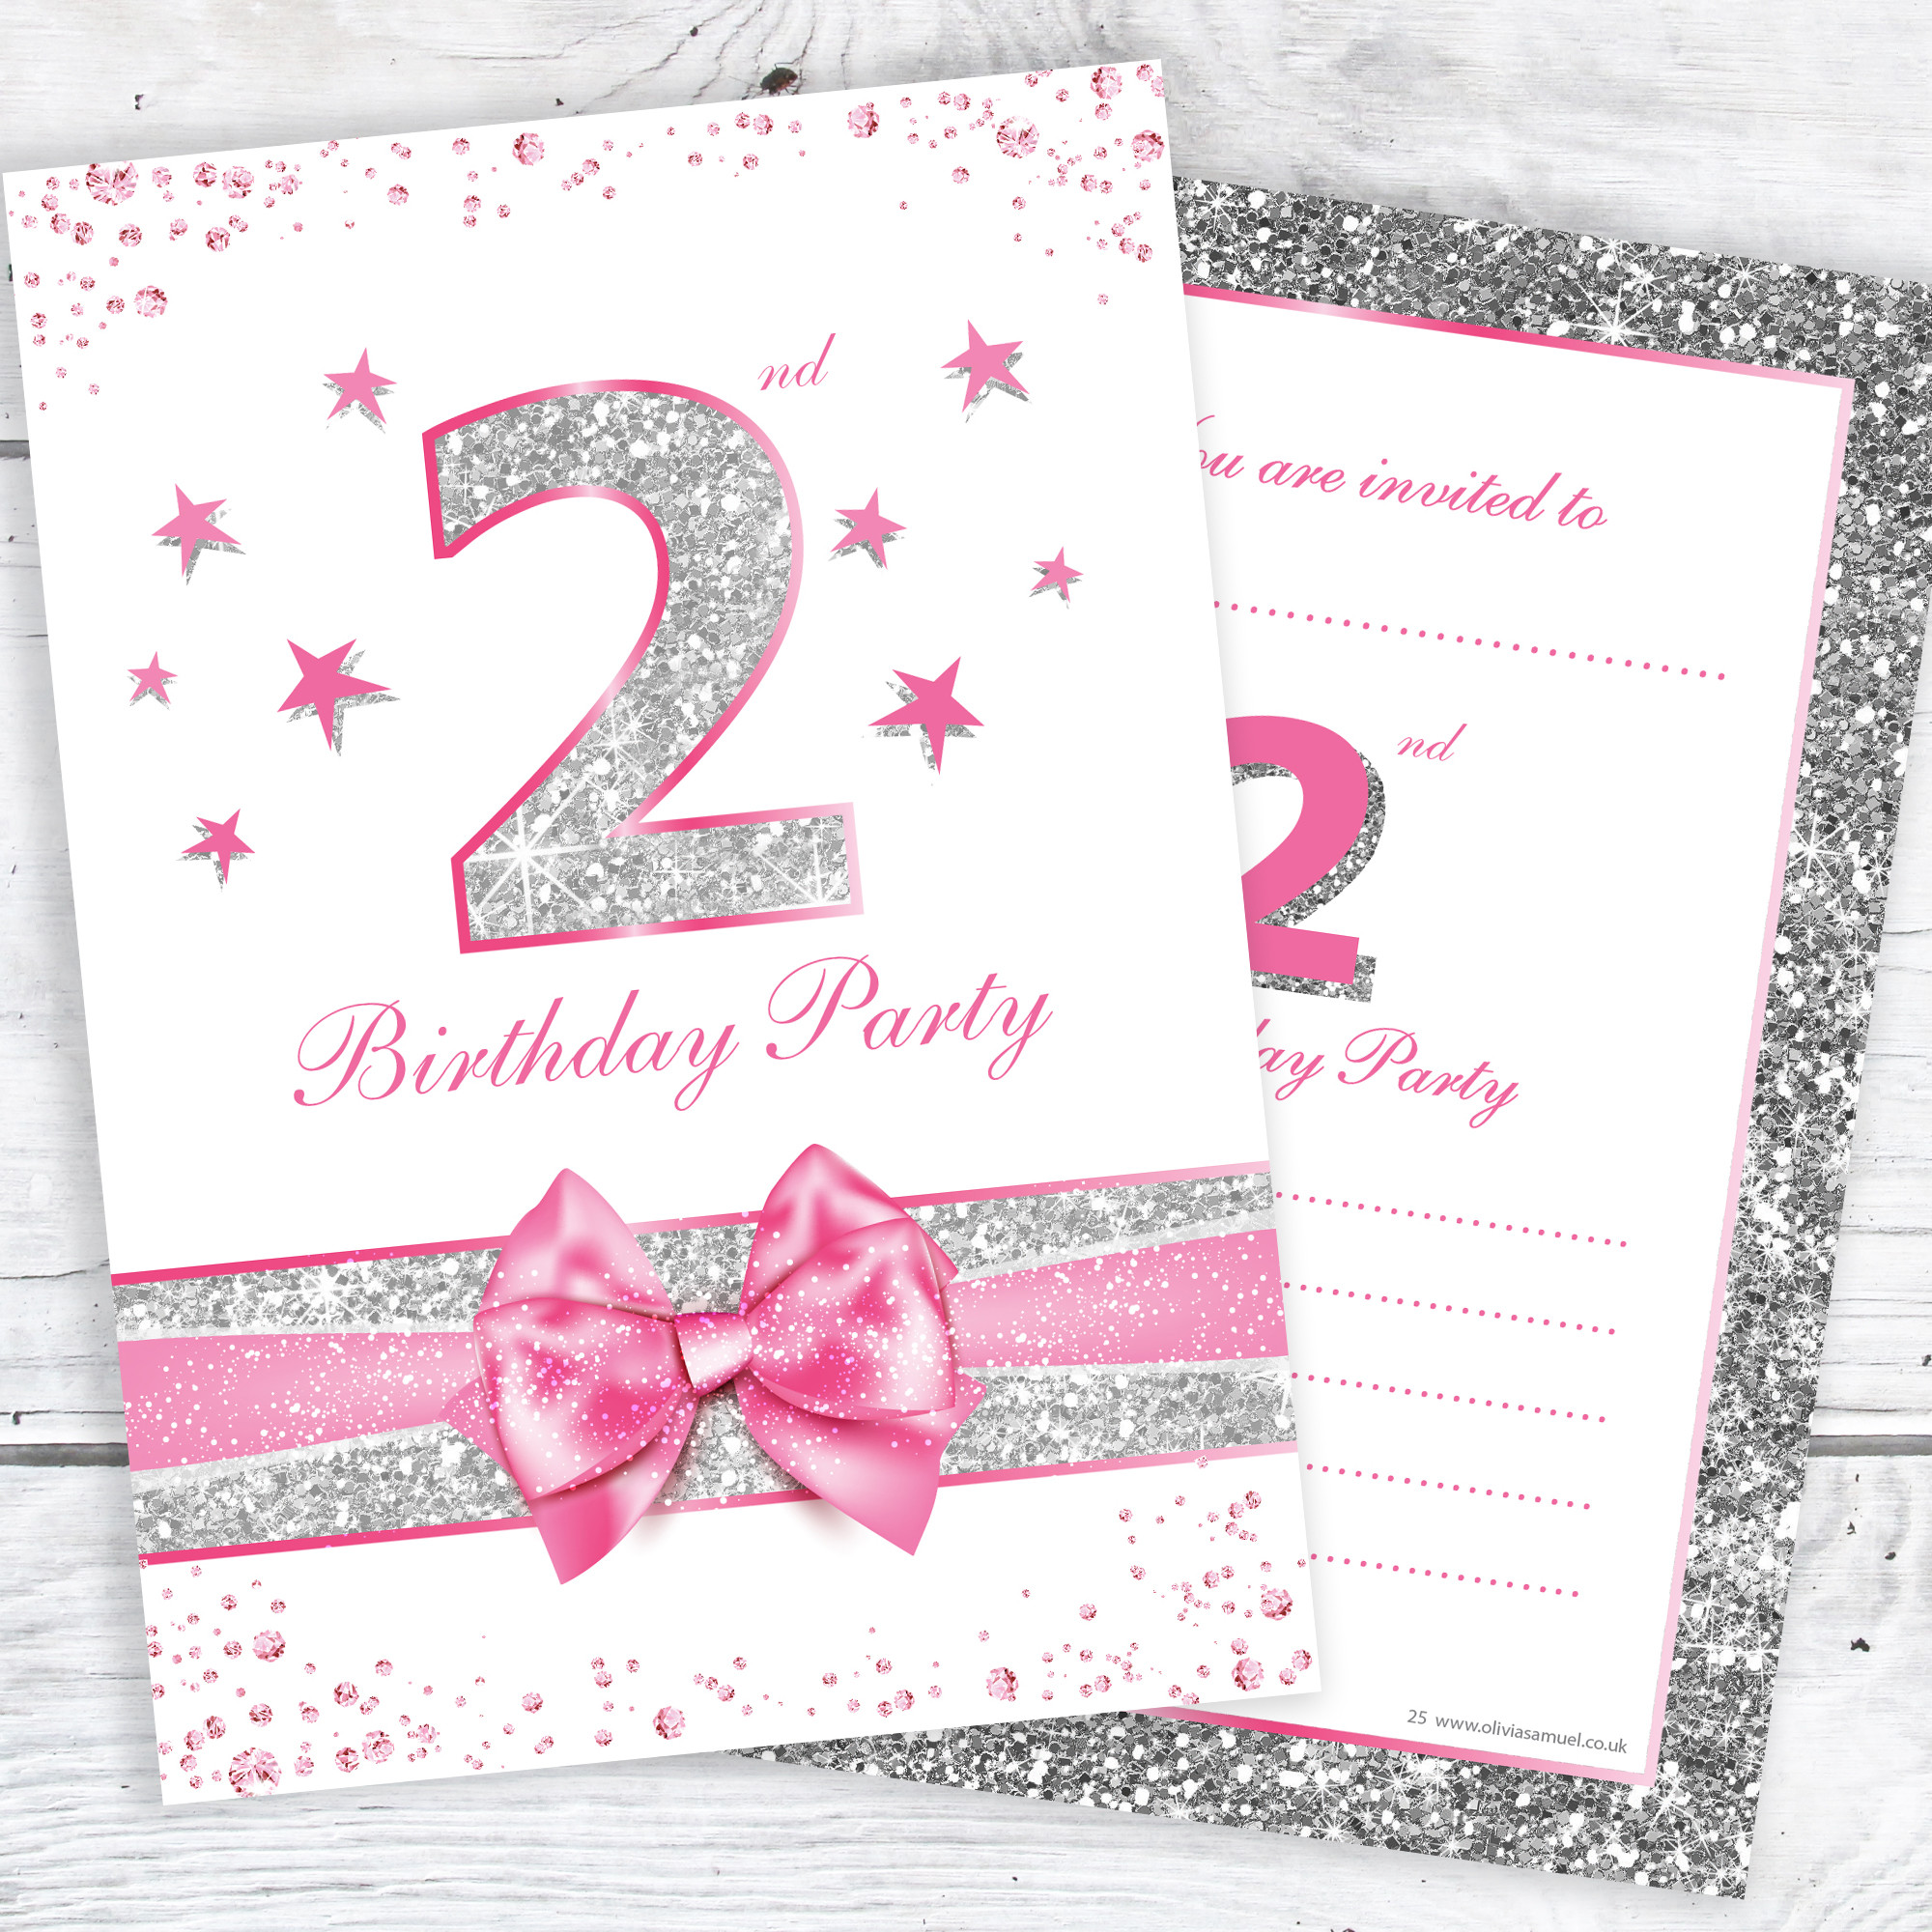 2nd Birthday Invitations
 2nd Birthday Party Invitations – Pink Sparkly Design and